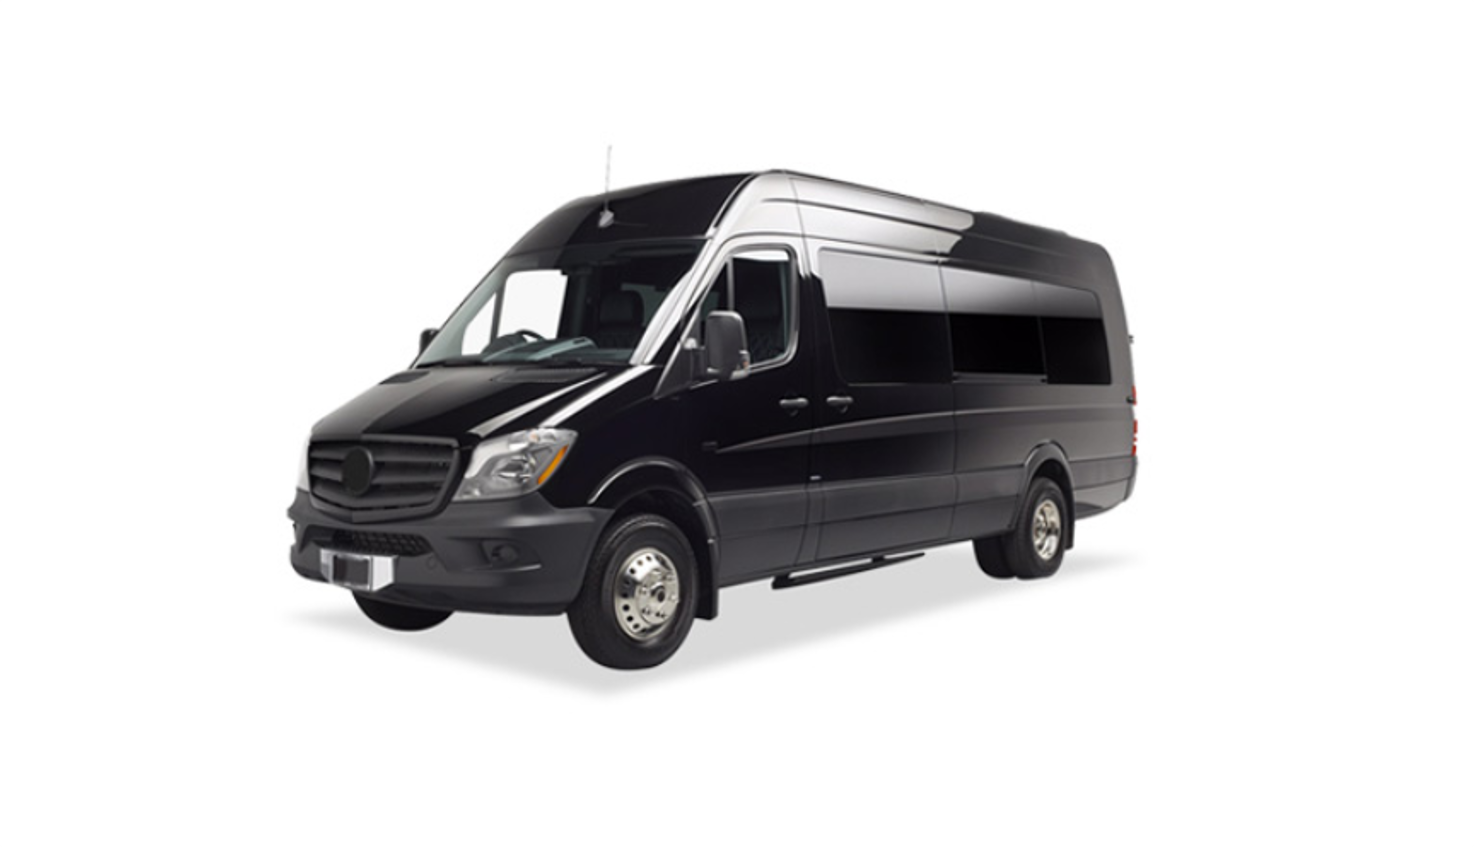 Mercedes Sprinter Limo - All Towns Limo